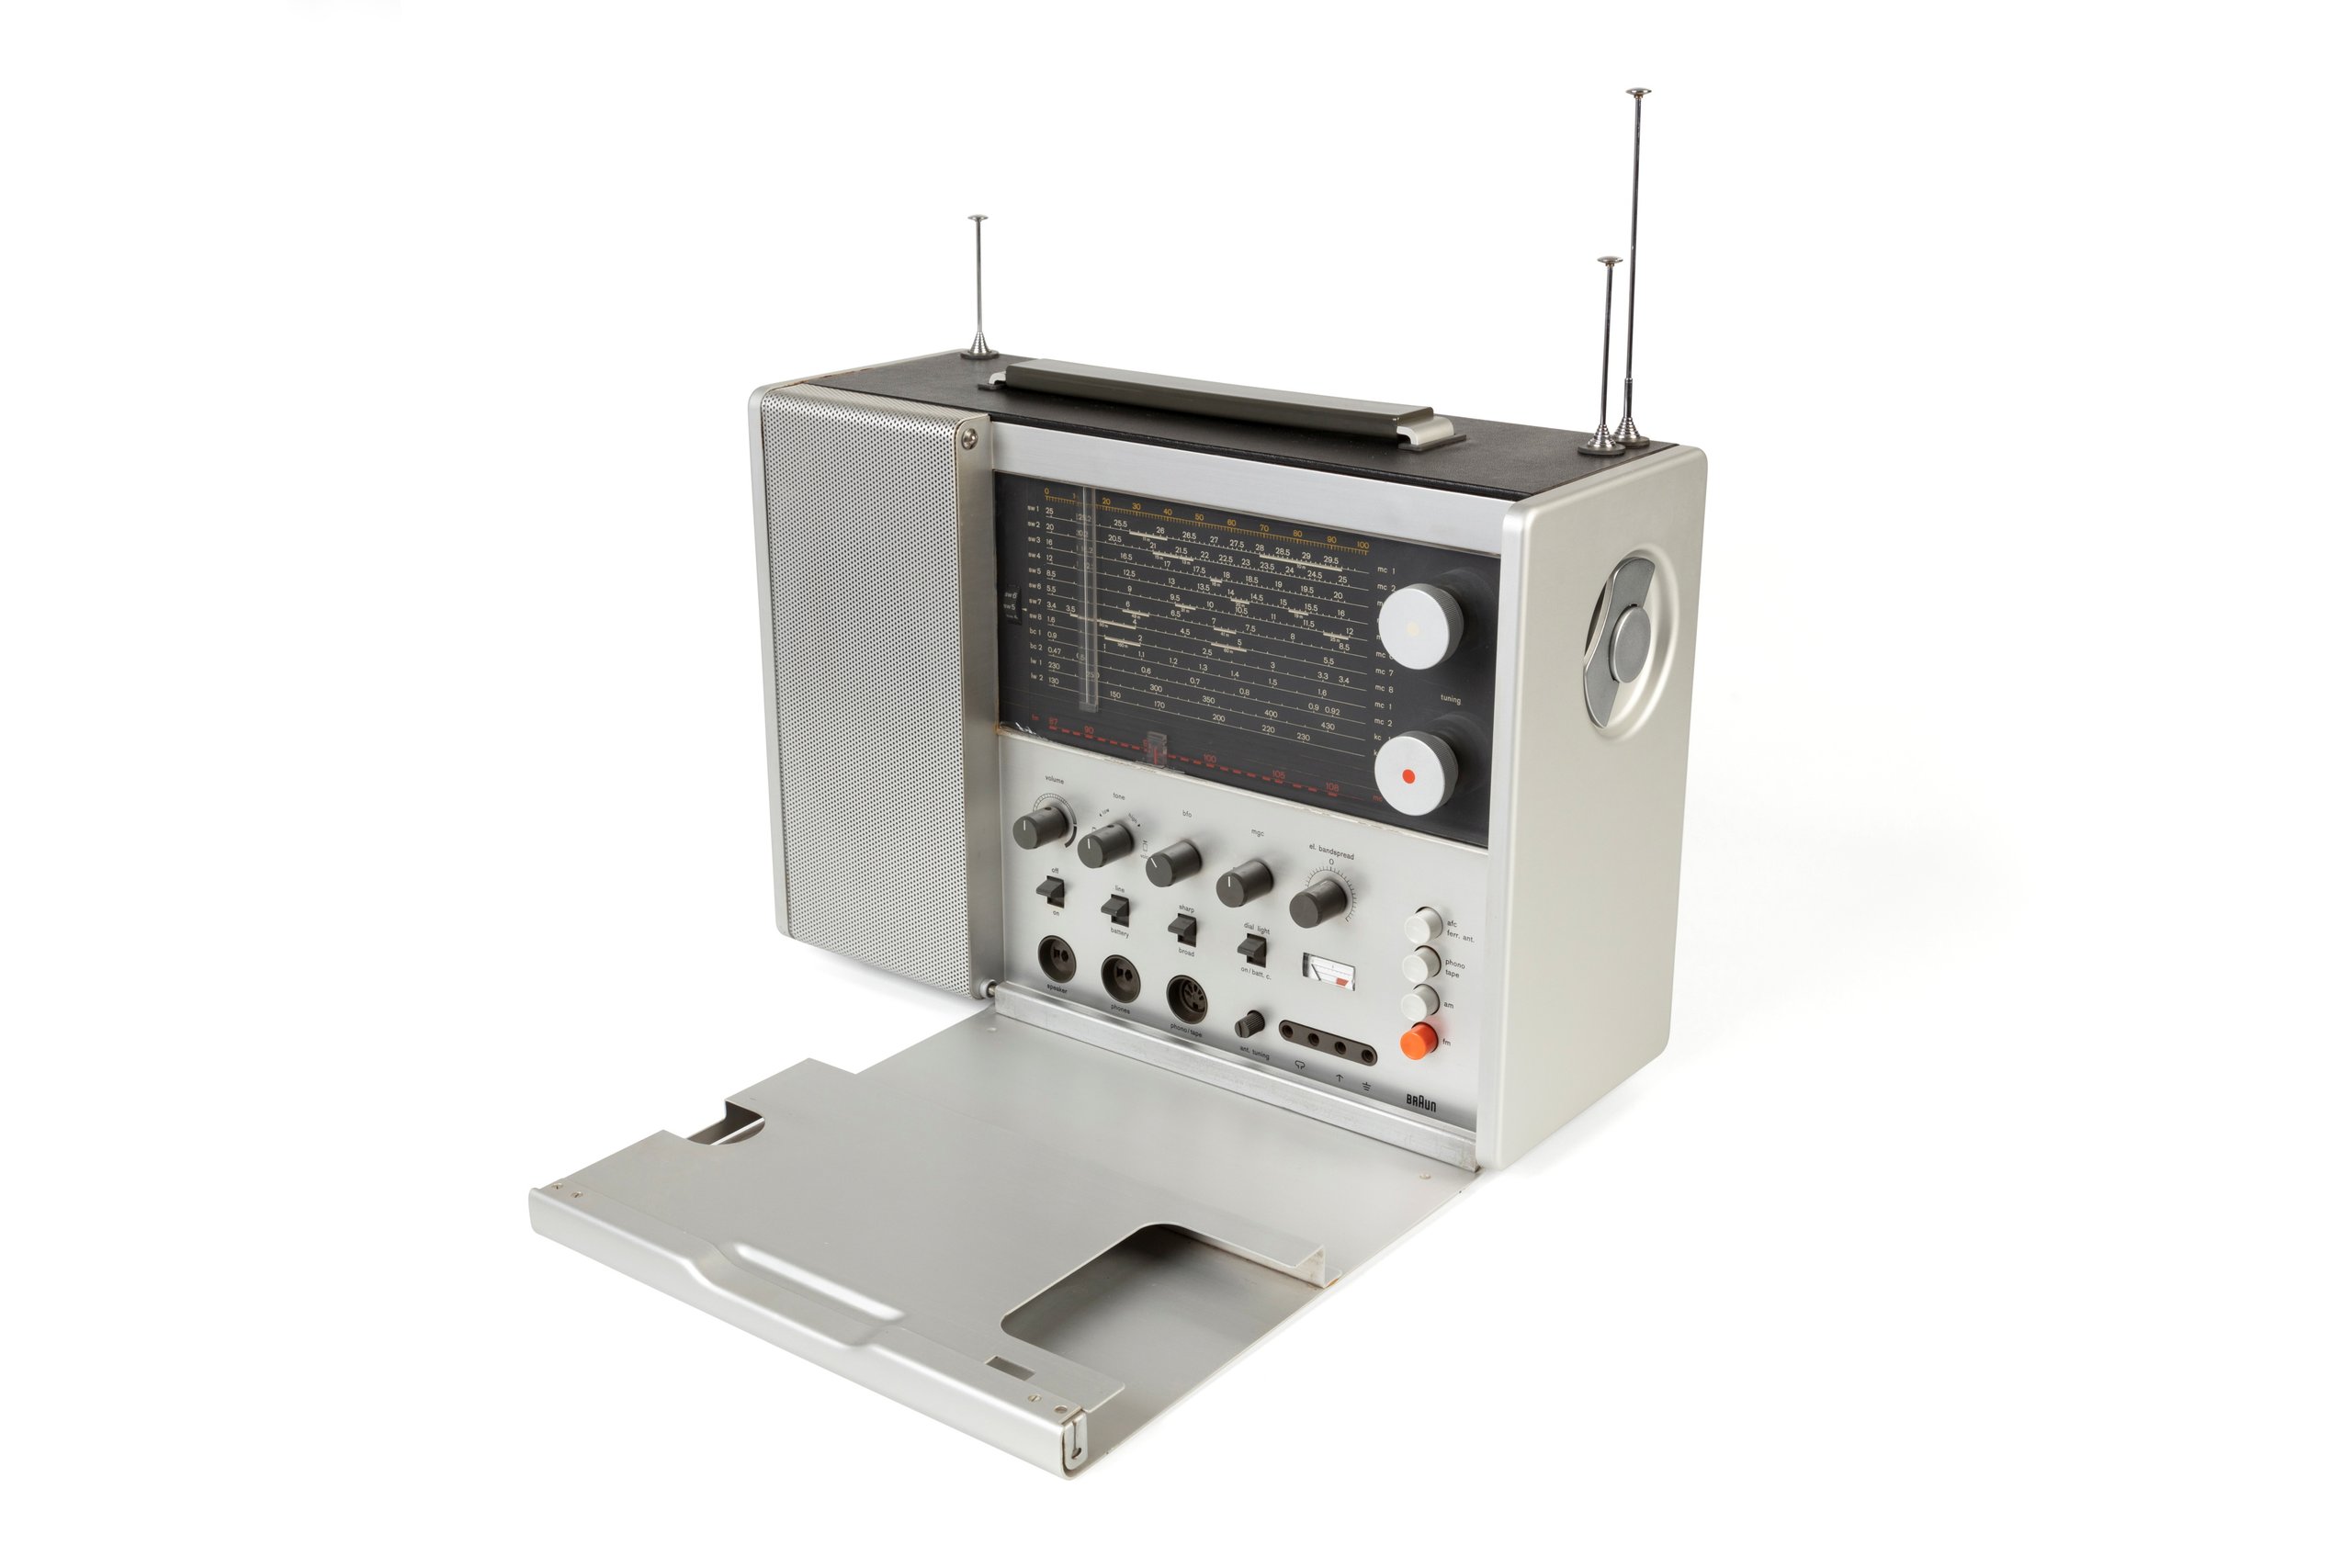 Powerhouse Collection - Braun T1000 multi band radio designed by Dieter Rams